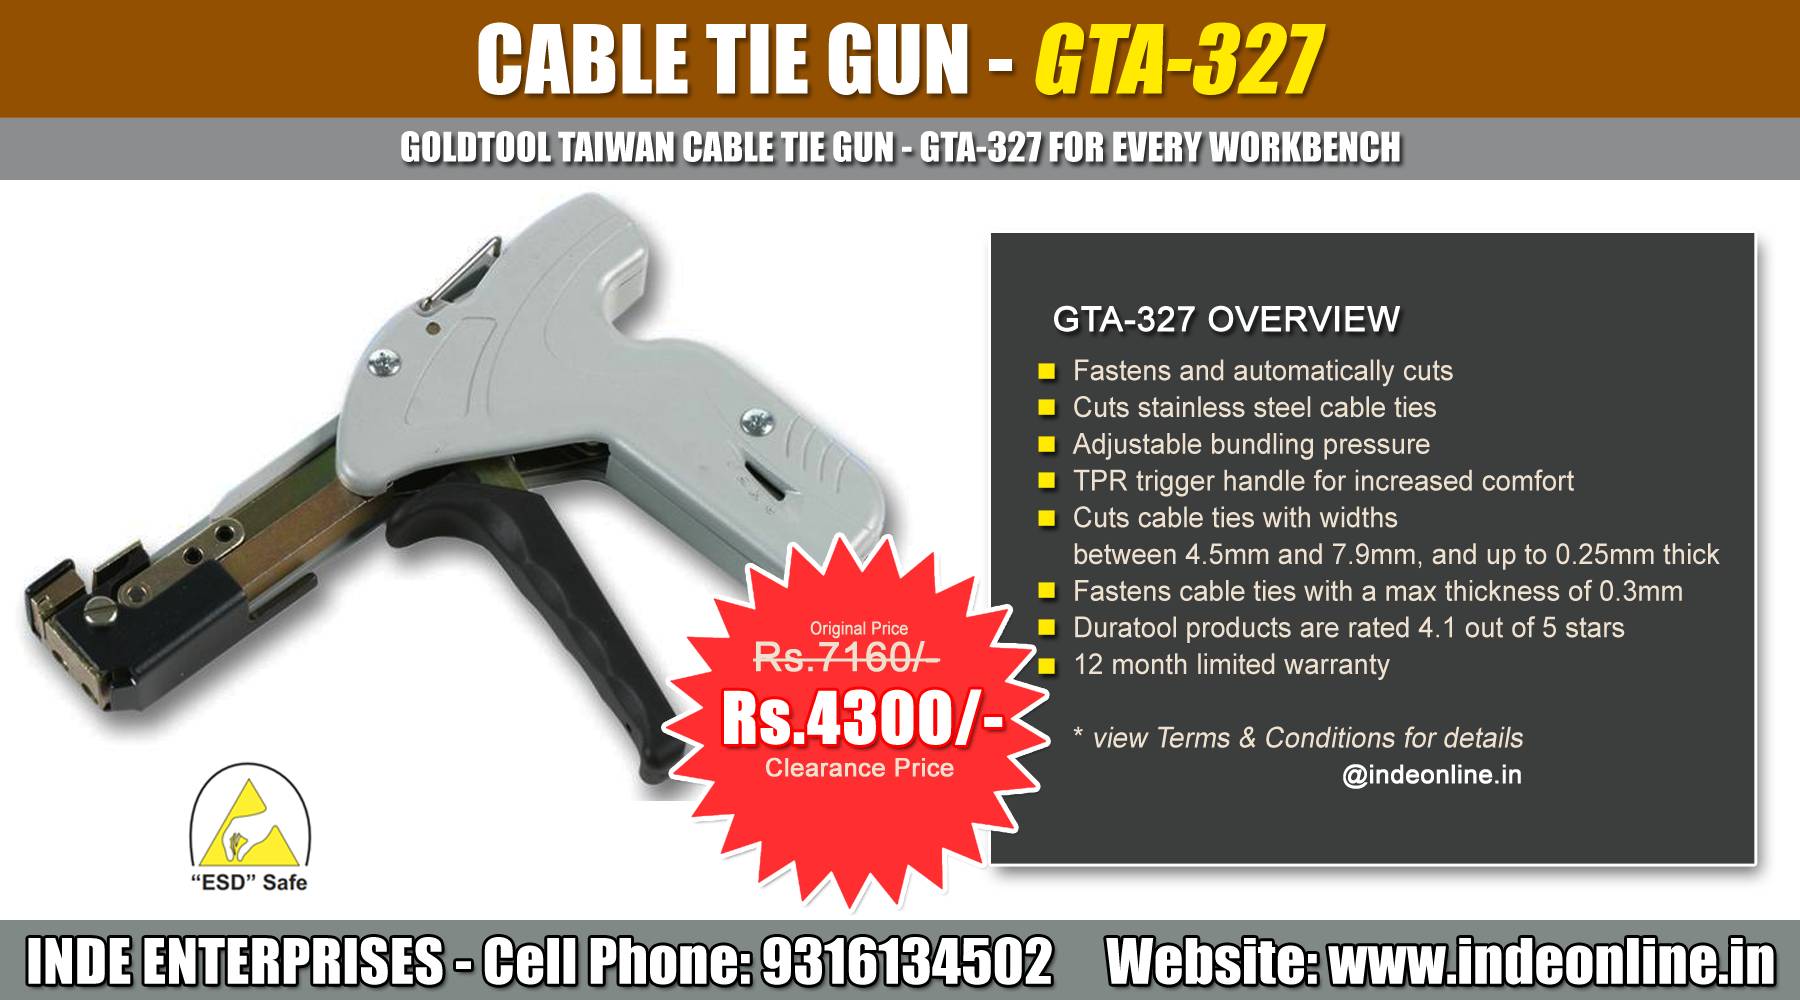 Best Cable Tie Gun Price Rs.4300/-